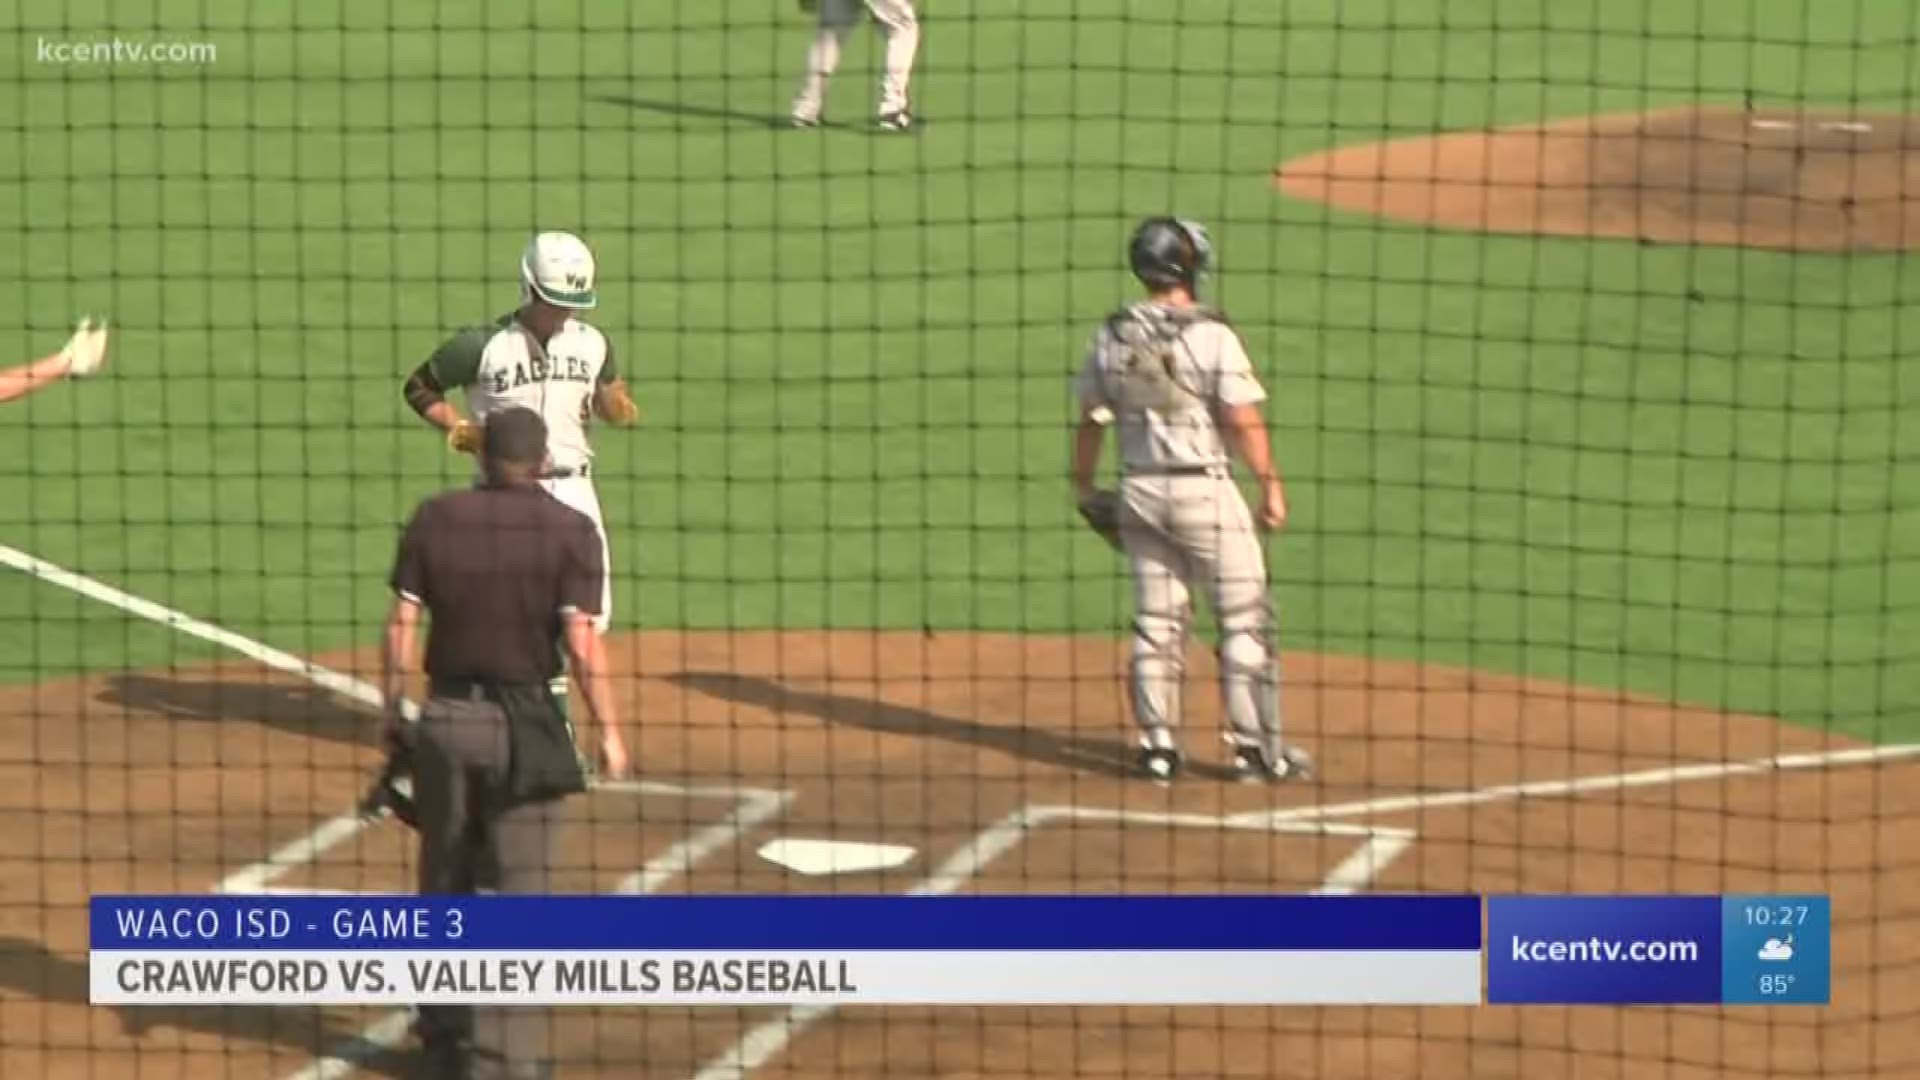 Valley Mills beat Crawford 10-7 to advance.